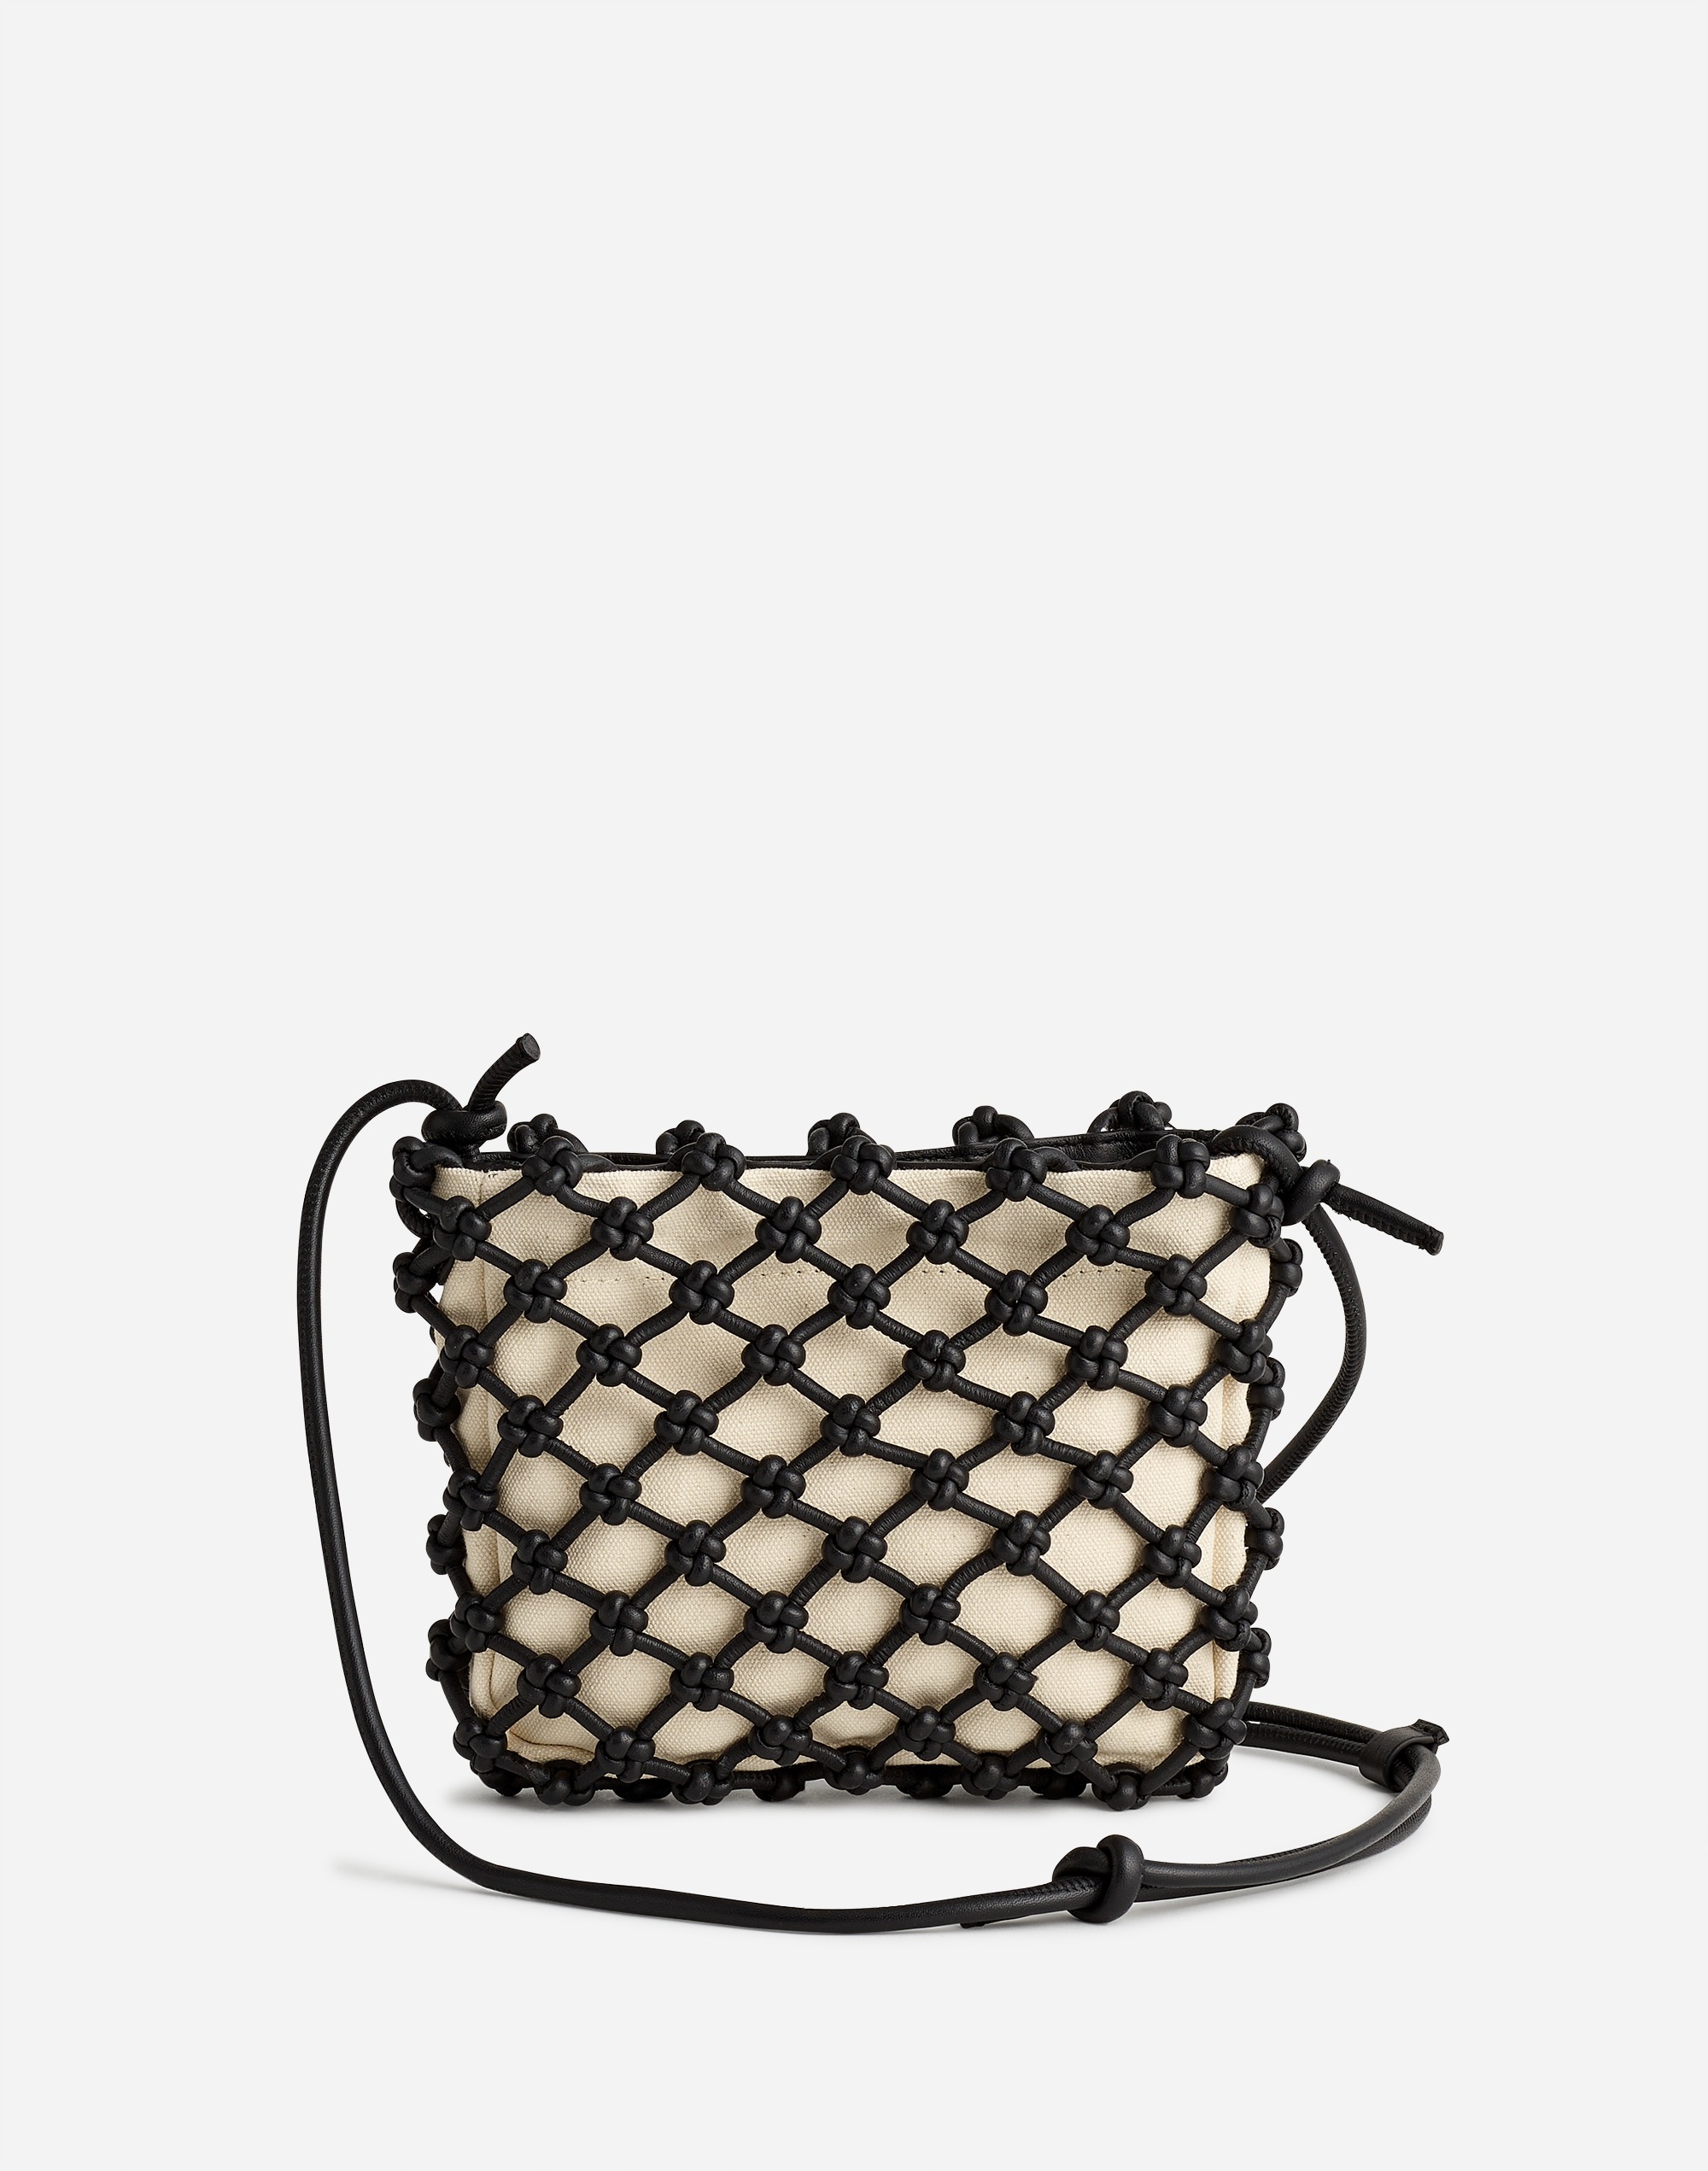 Mw The Knotted Leather Crossbody Bag In Black